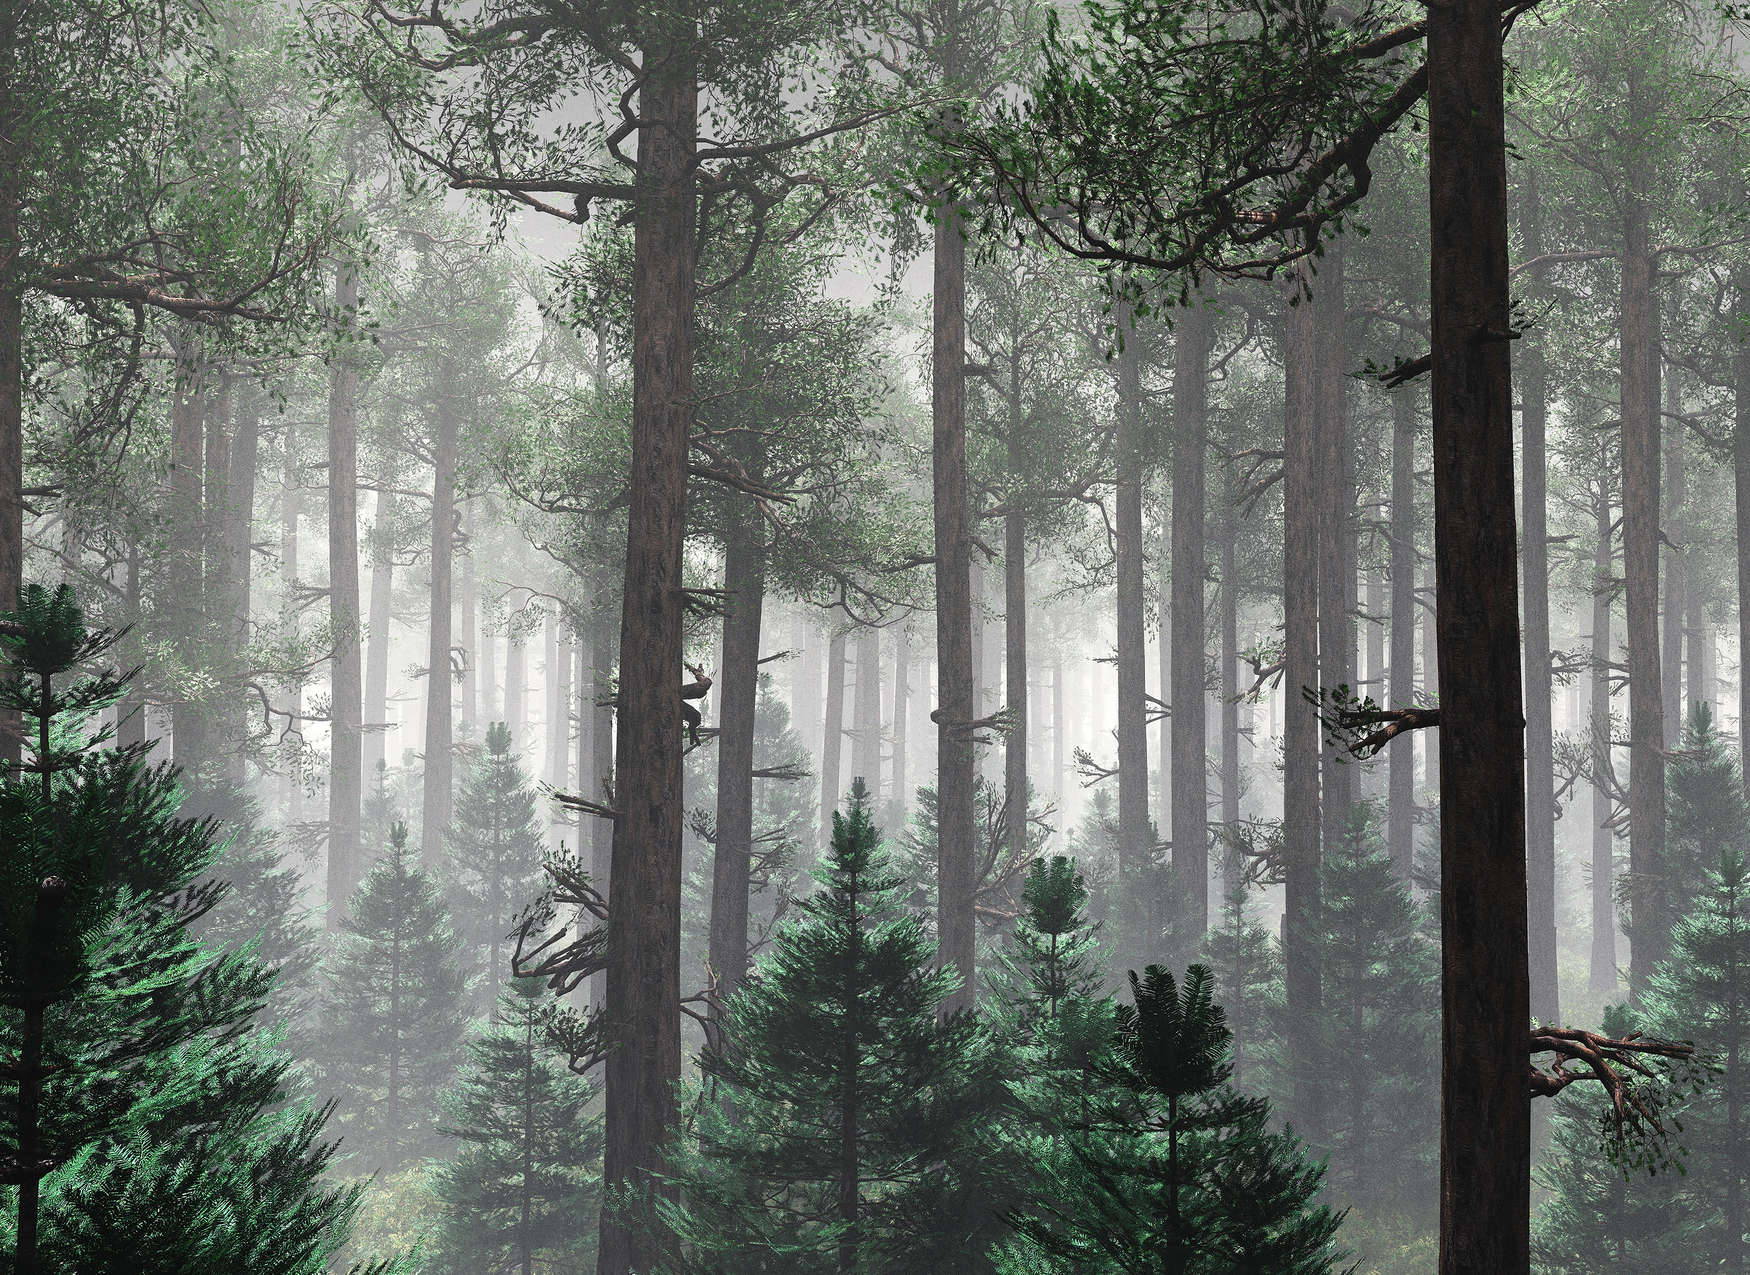             Photo wallpaper Forest in the mist with large trees - Green, Brown, Grey
        